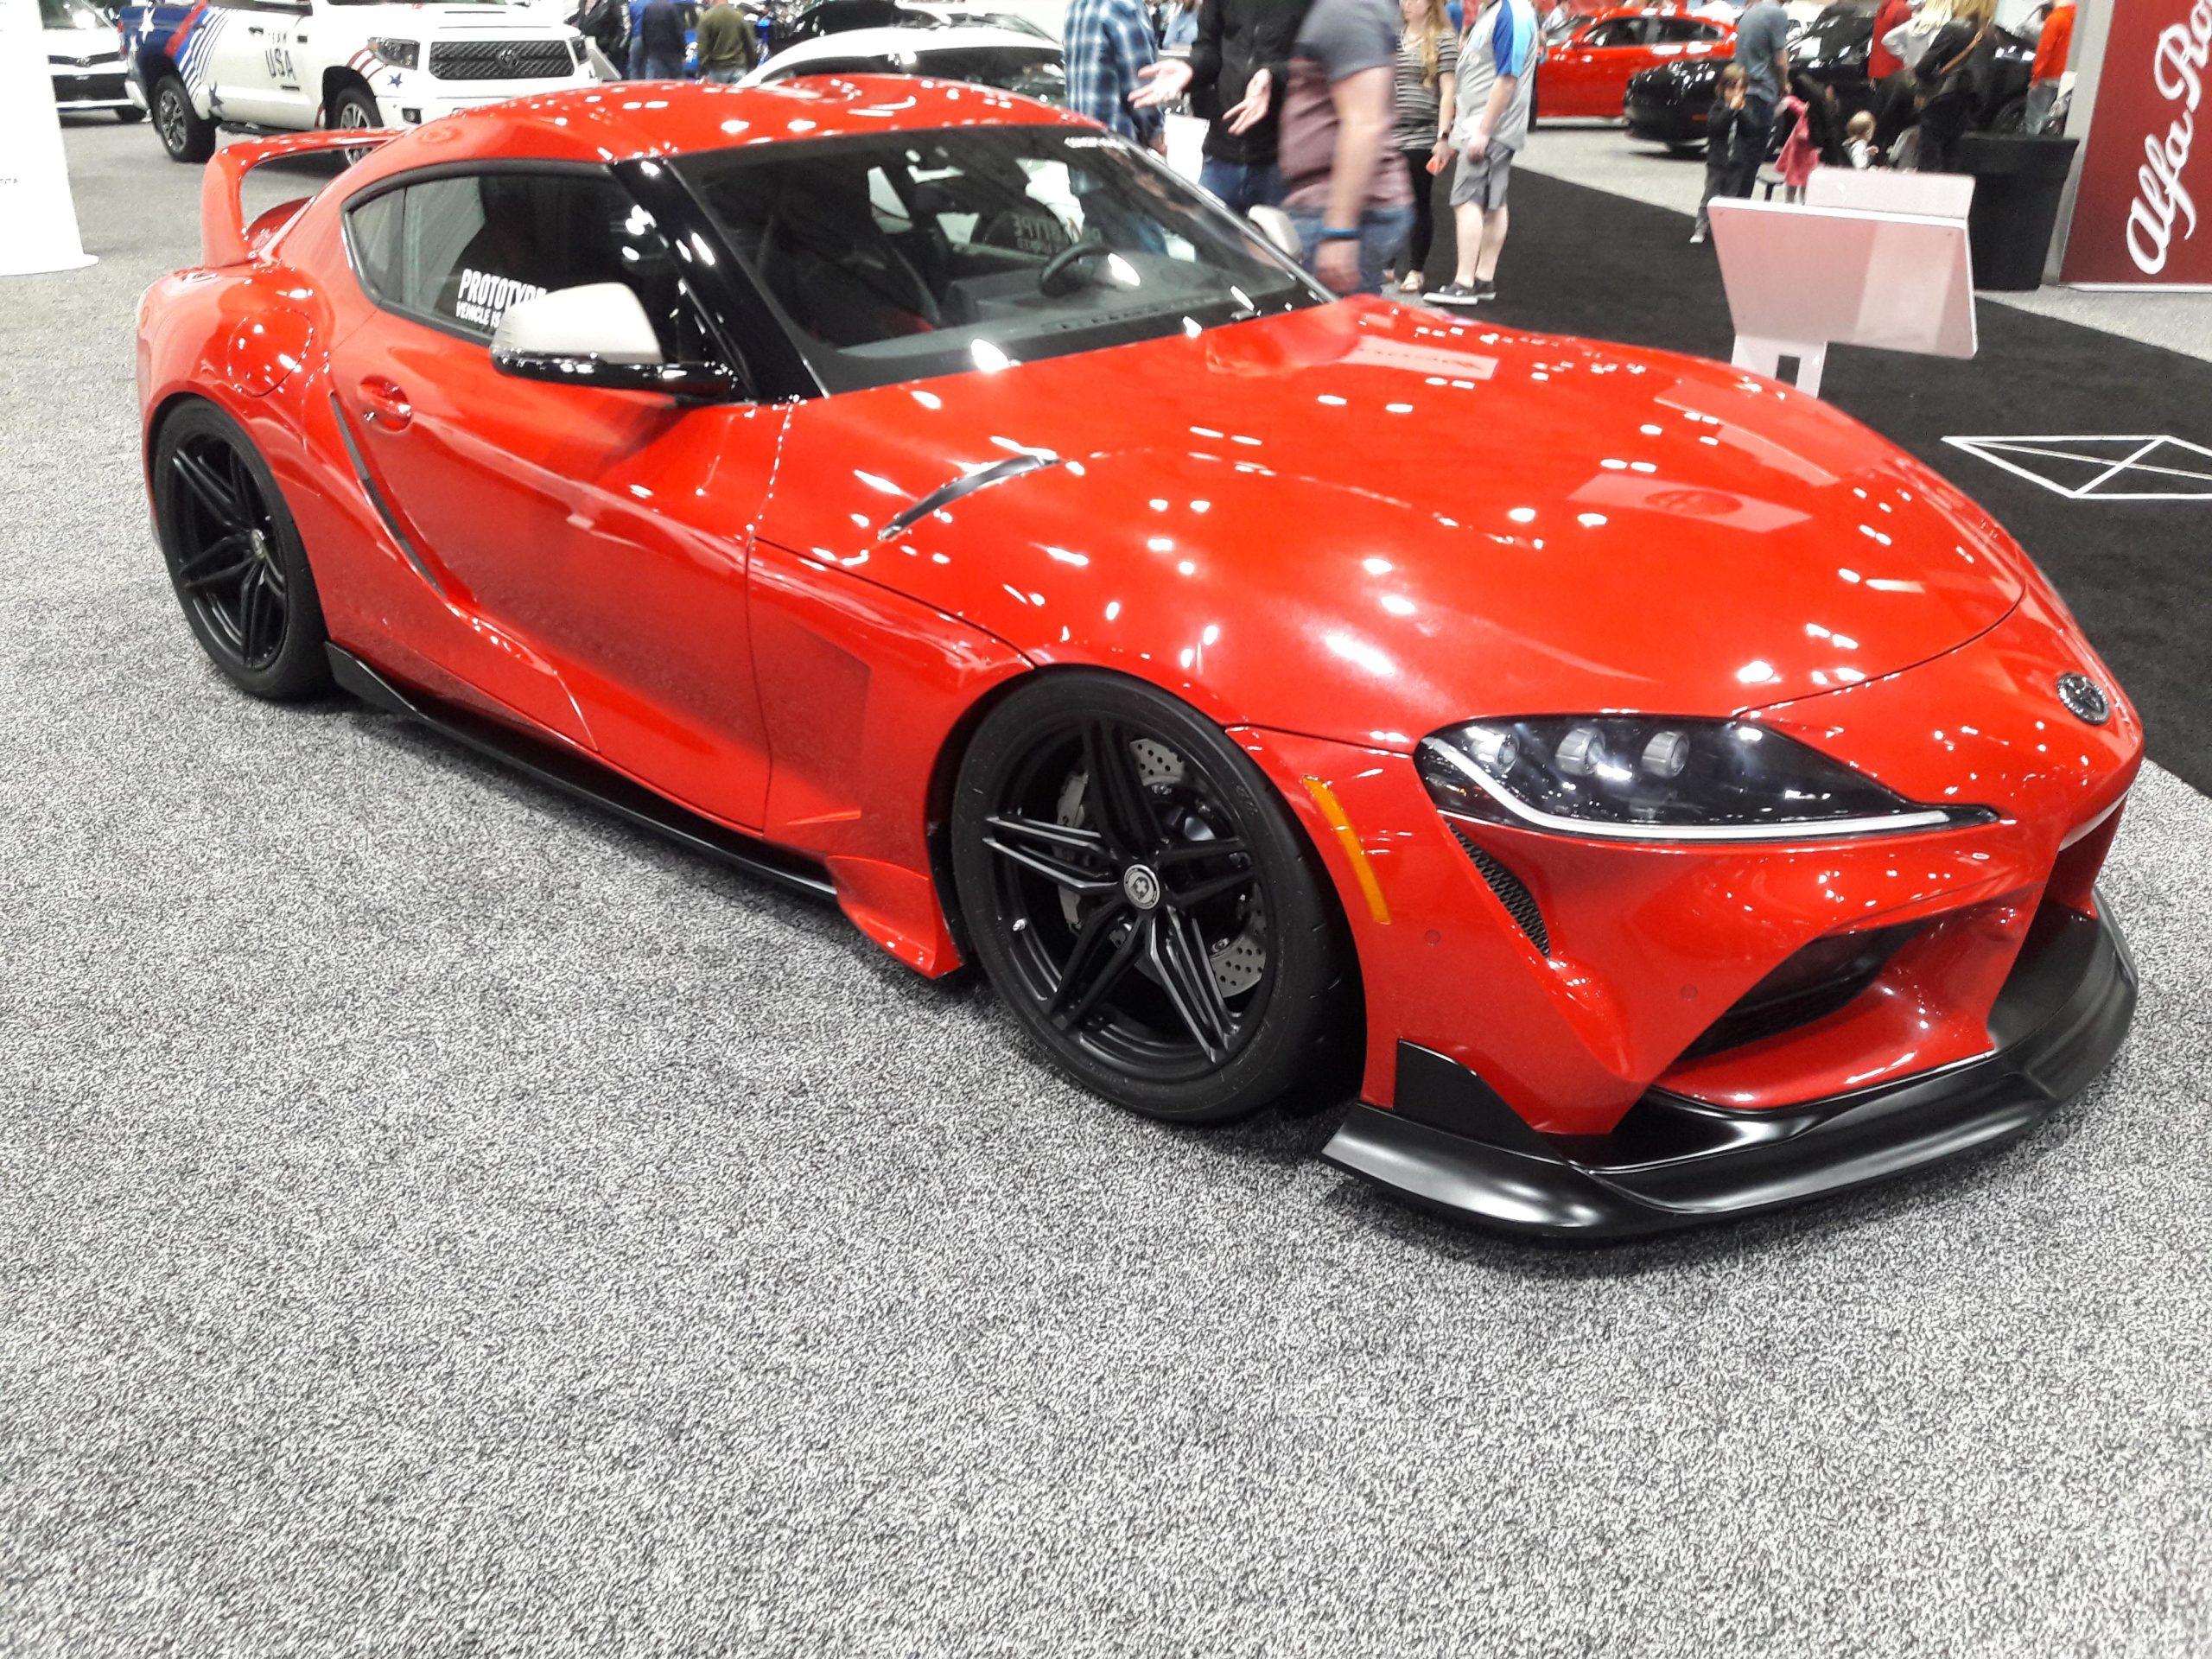 If this supra is the next step, I’m in